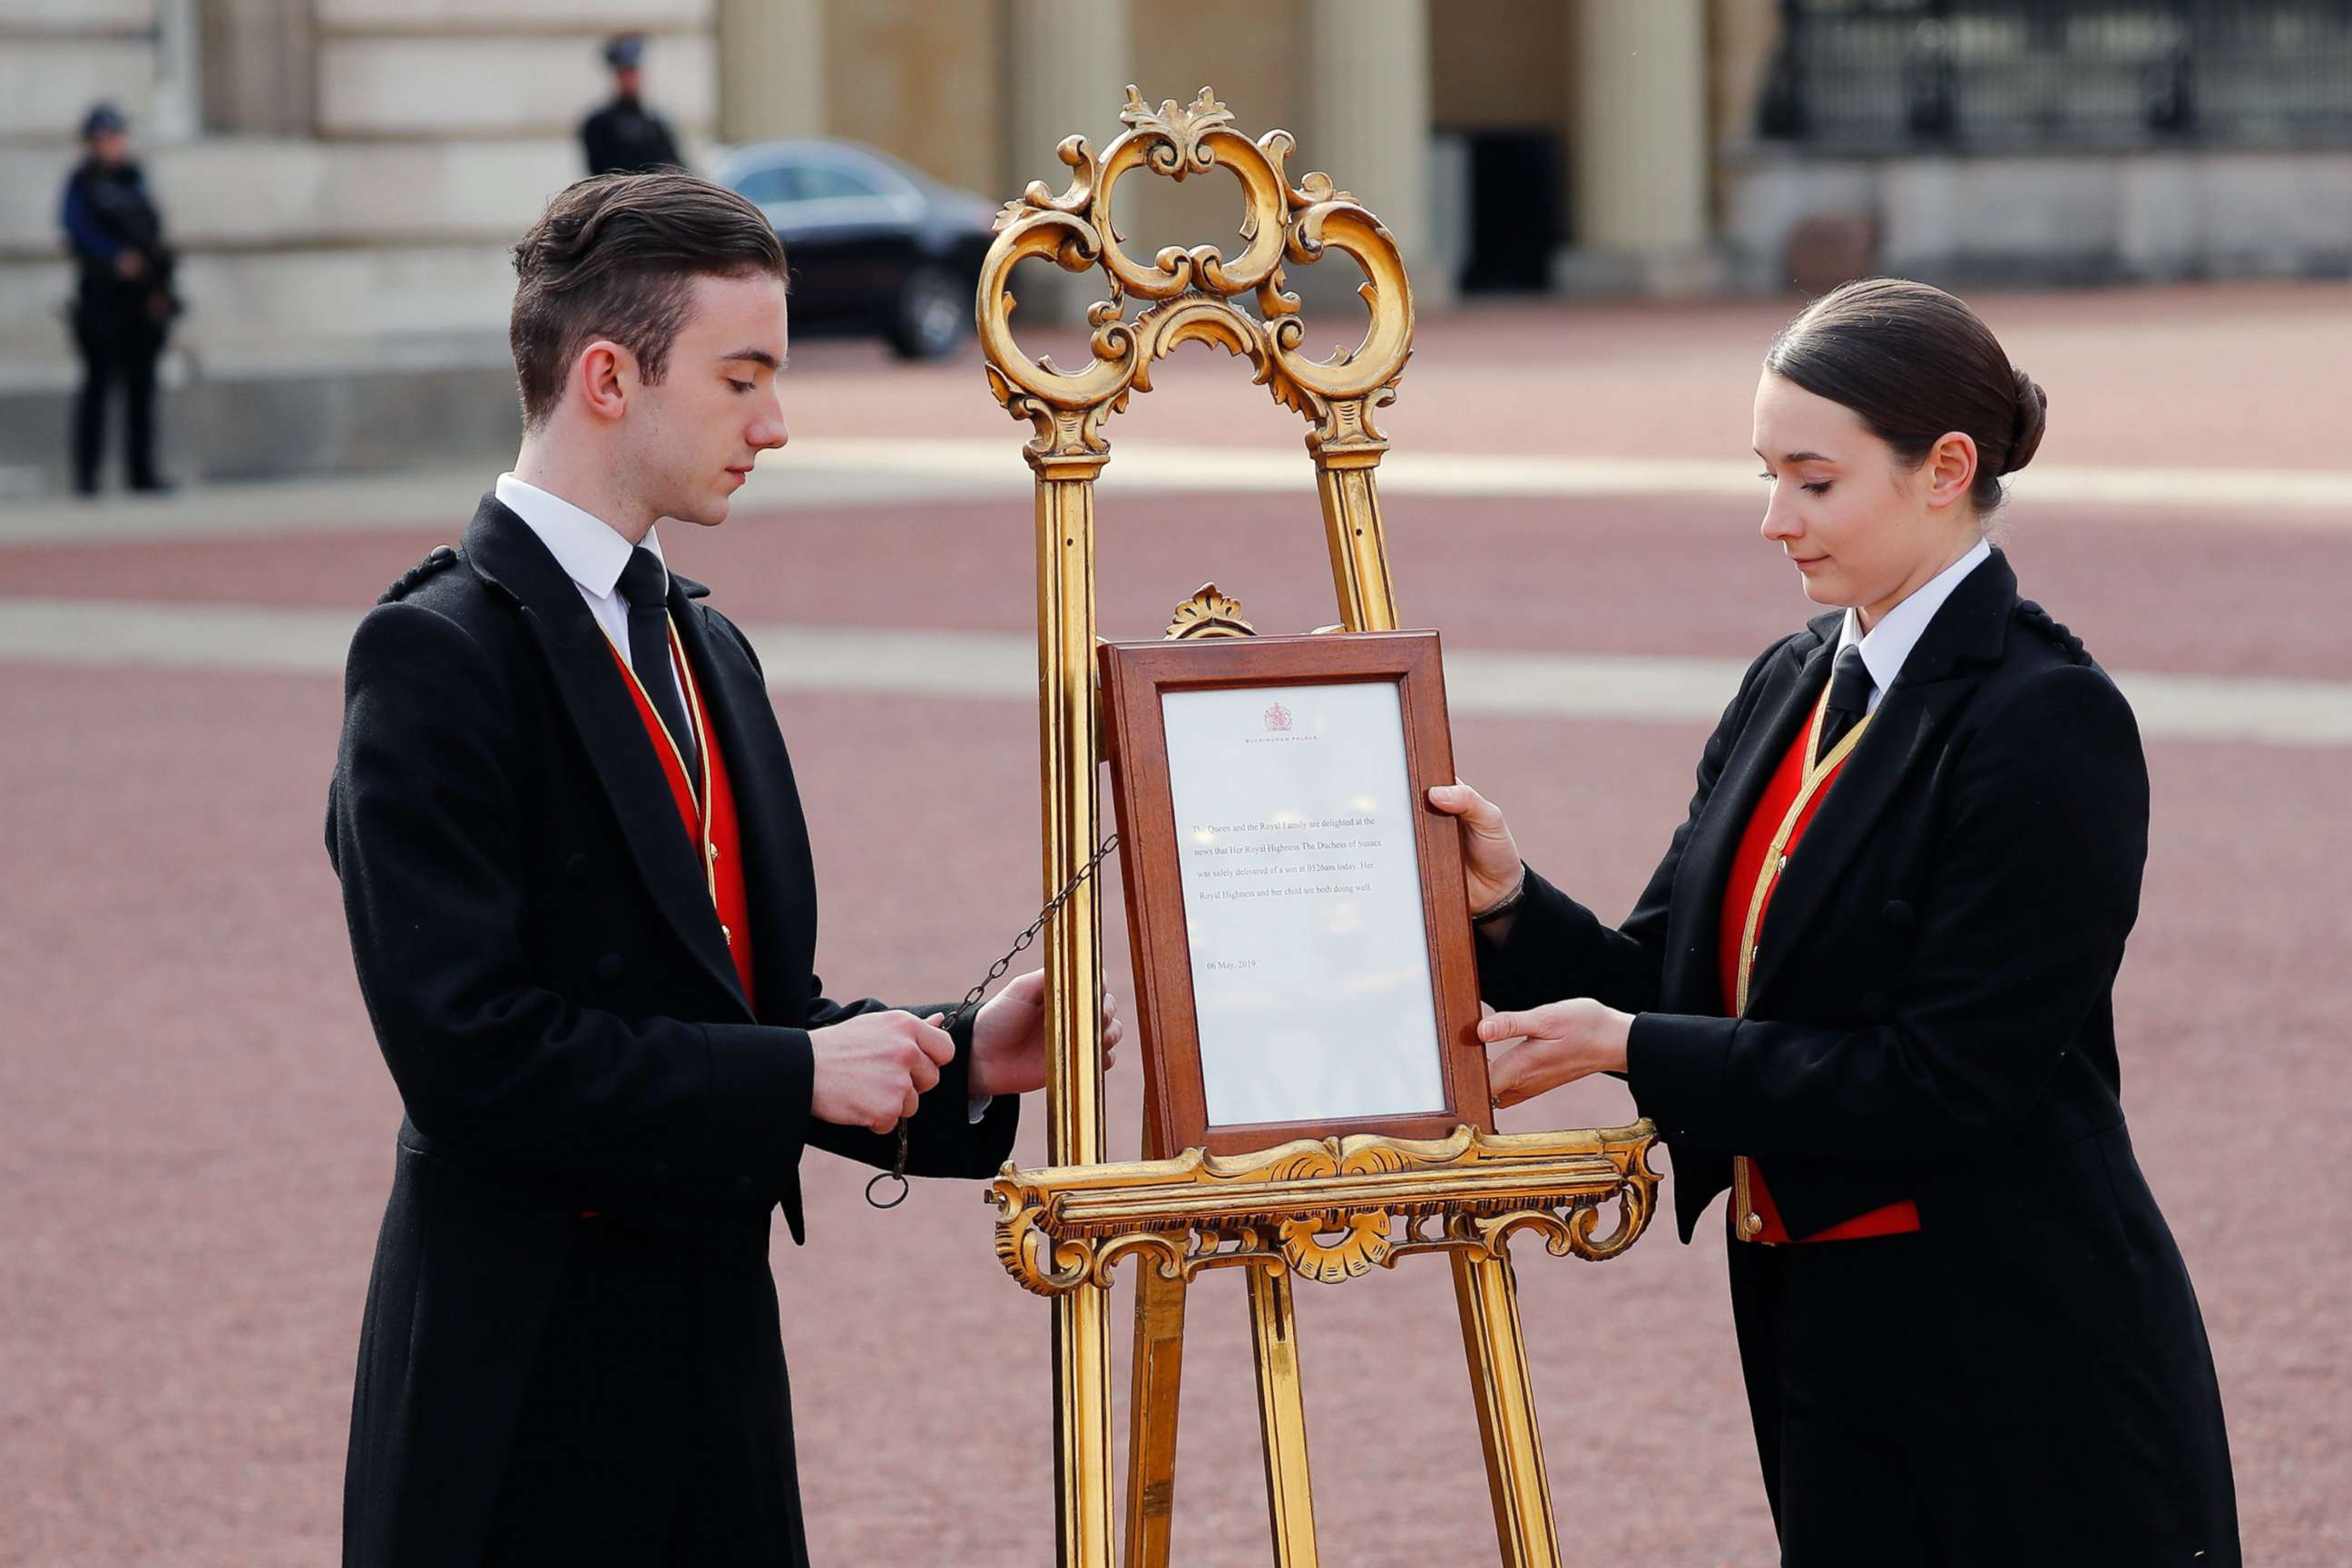 PHOTO: Members of staff set up an official notice on an easel at the gates of Buckingham Palace in London on May 6, 2019 announcing the birth of a son to Britain's Prince Harry, Duke of Sussex and Meghan, Duchess of Sussex.